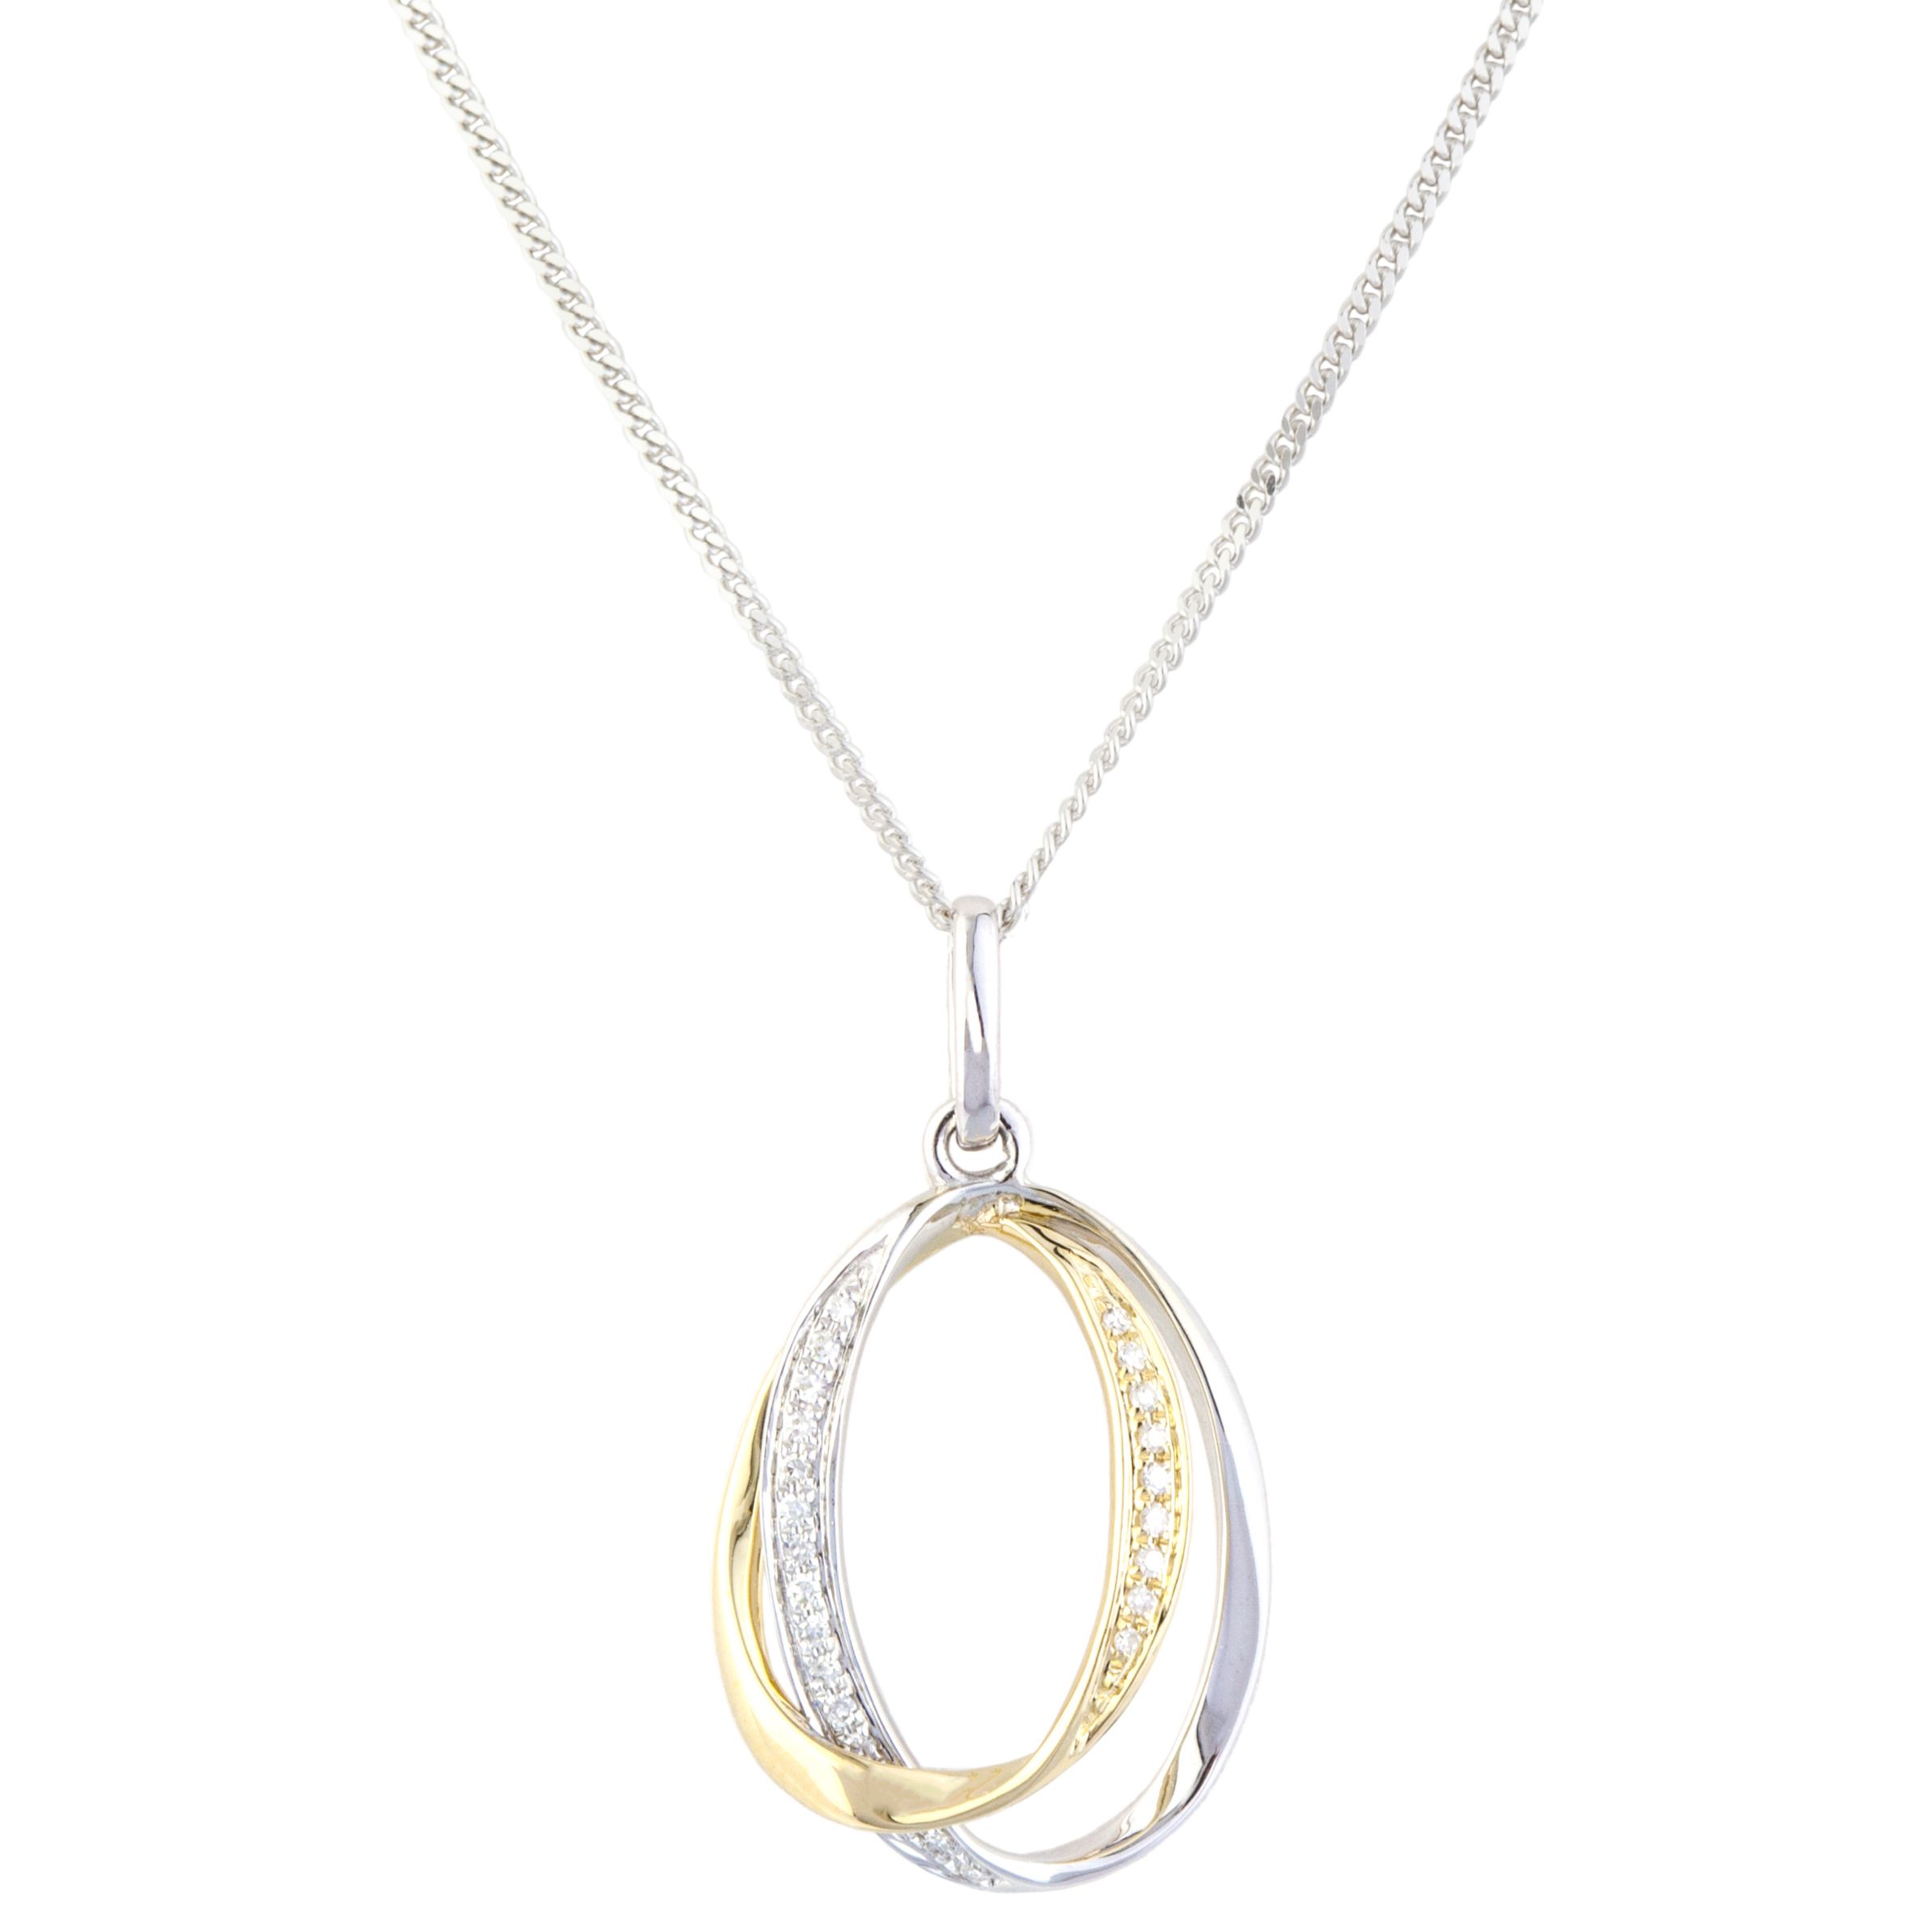 A B Davis 9ct Mixed Gold Diamond Double Oval Pendant Necklace, Yellow Gold/White Gold